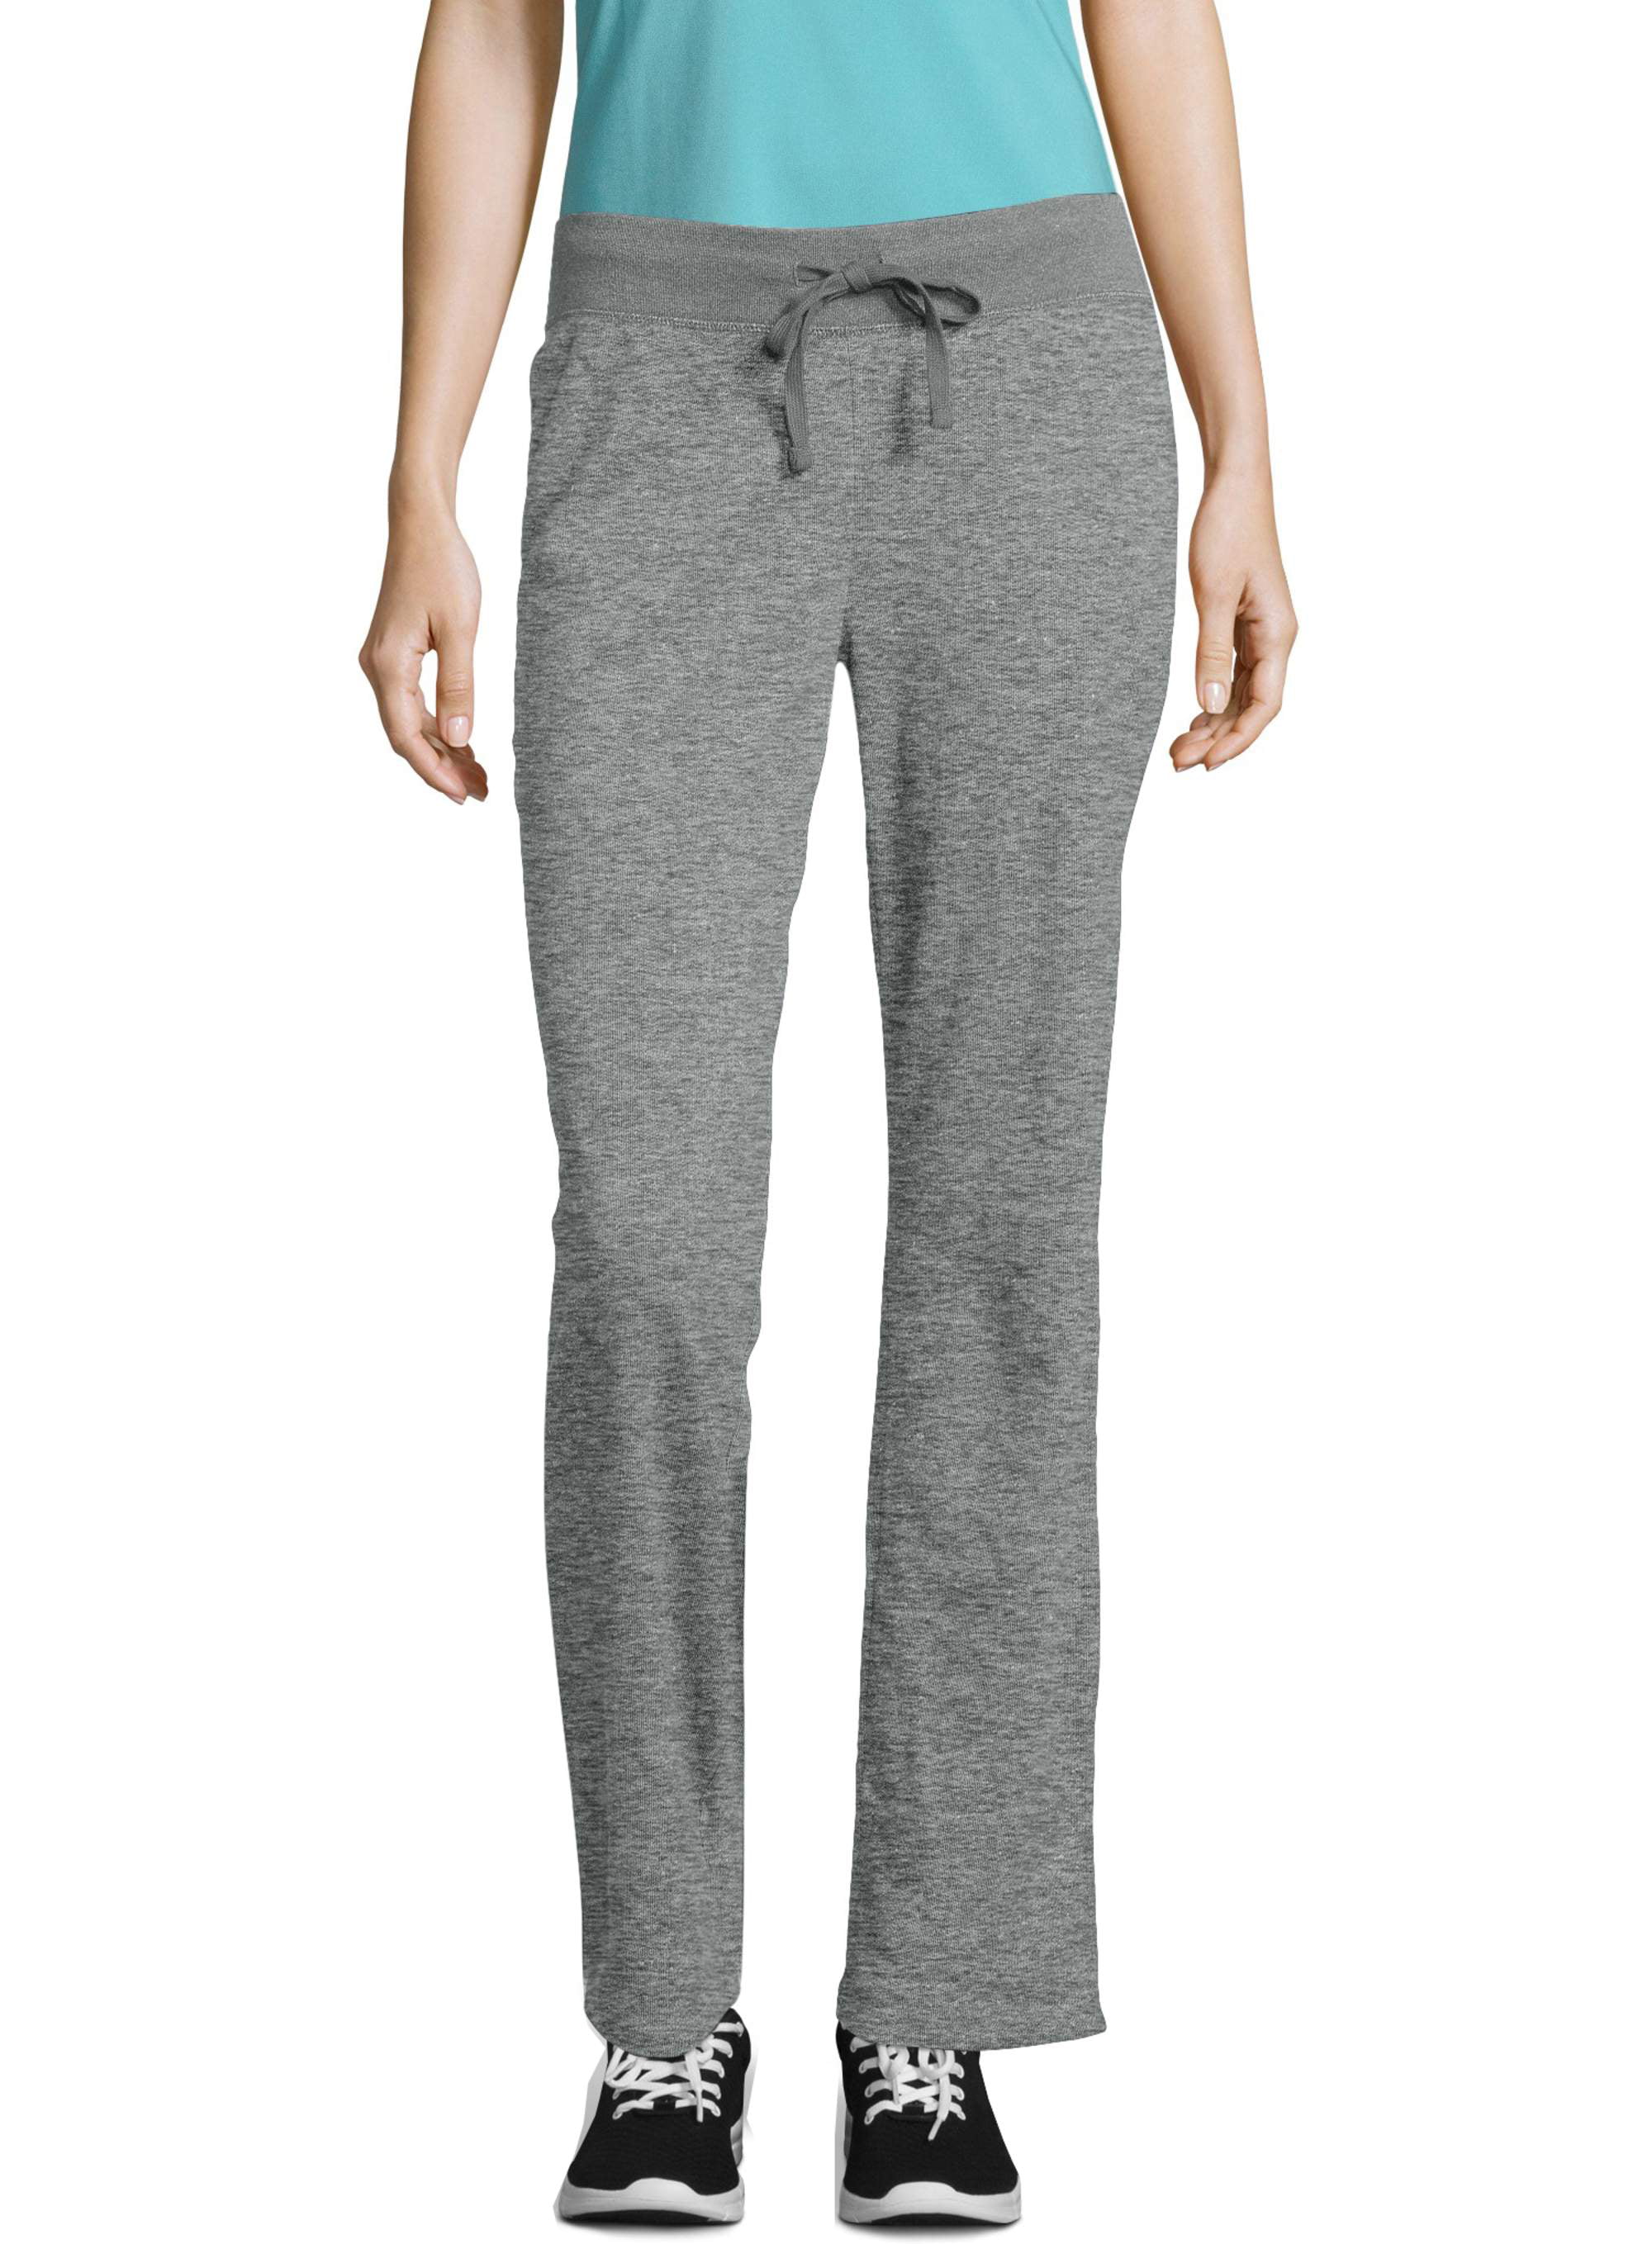 Hanes Women's French Terry Pant with Outside Drawcord - Walmart.com